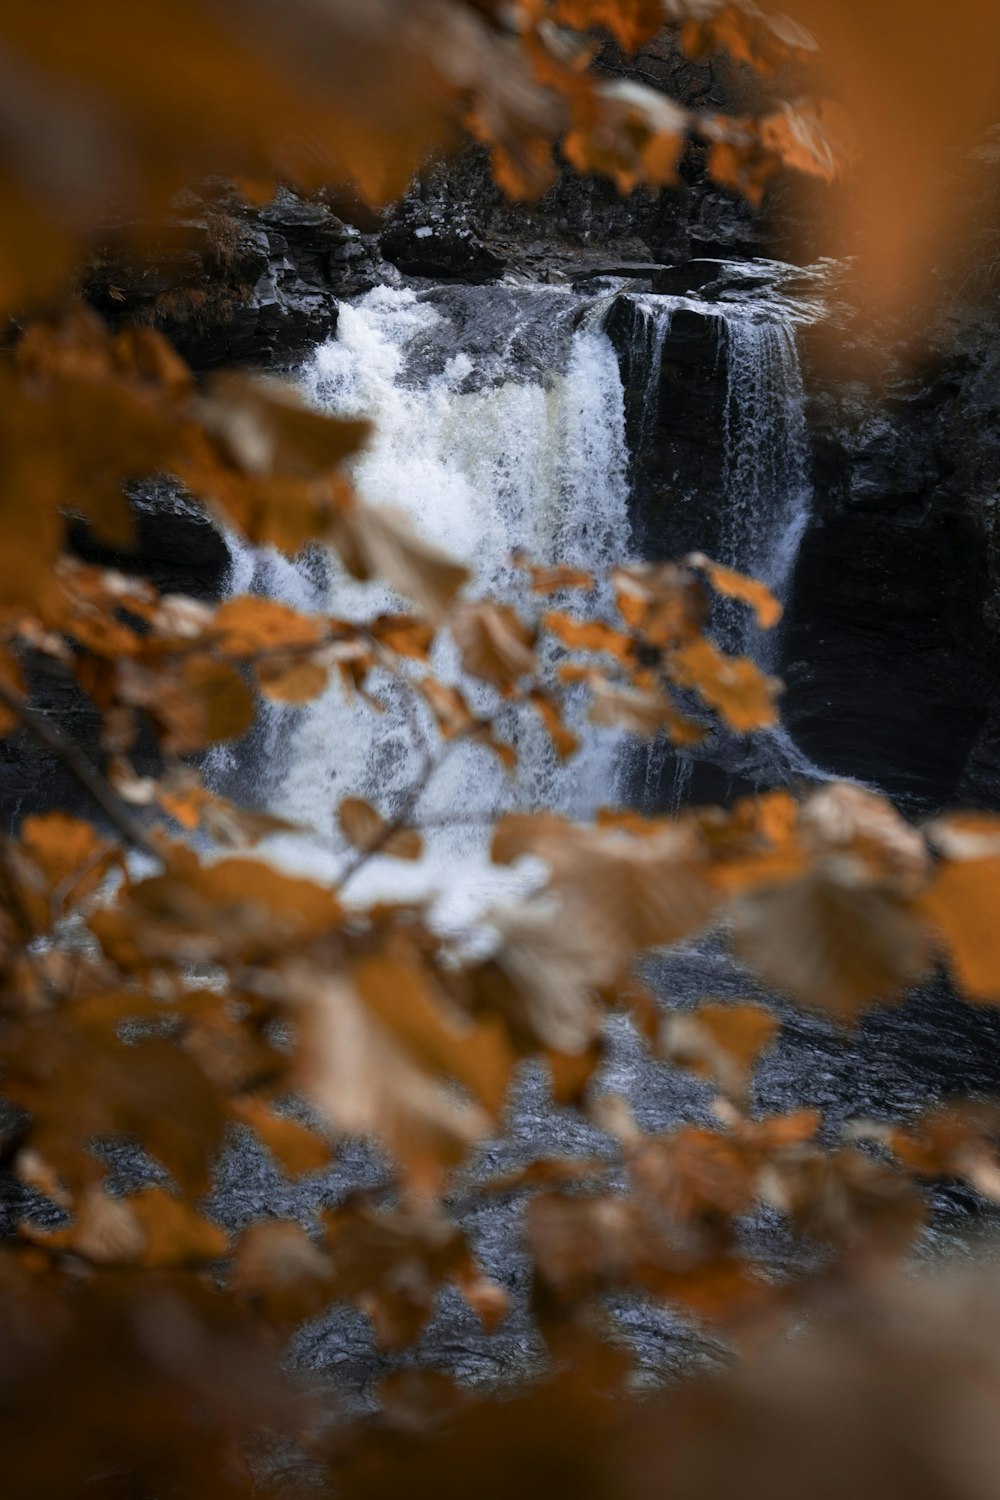 a waterfall is seen through the leaves of a tree